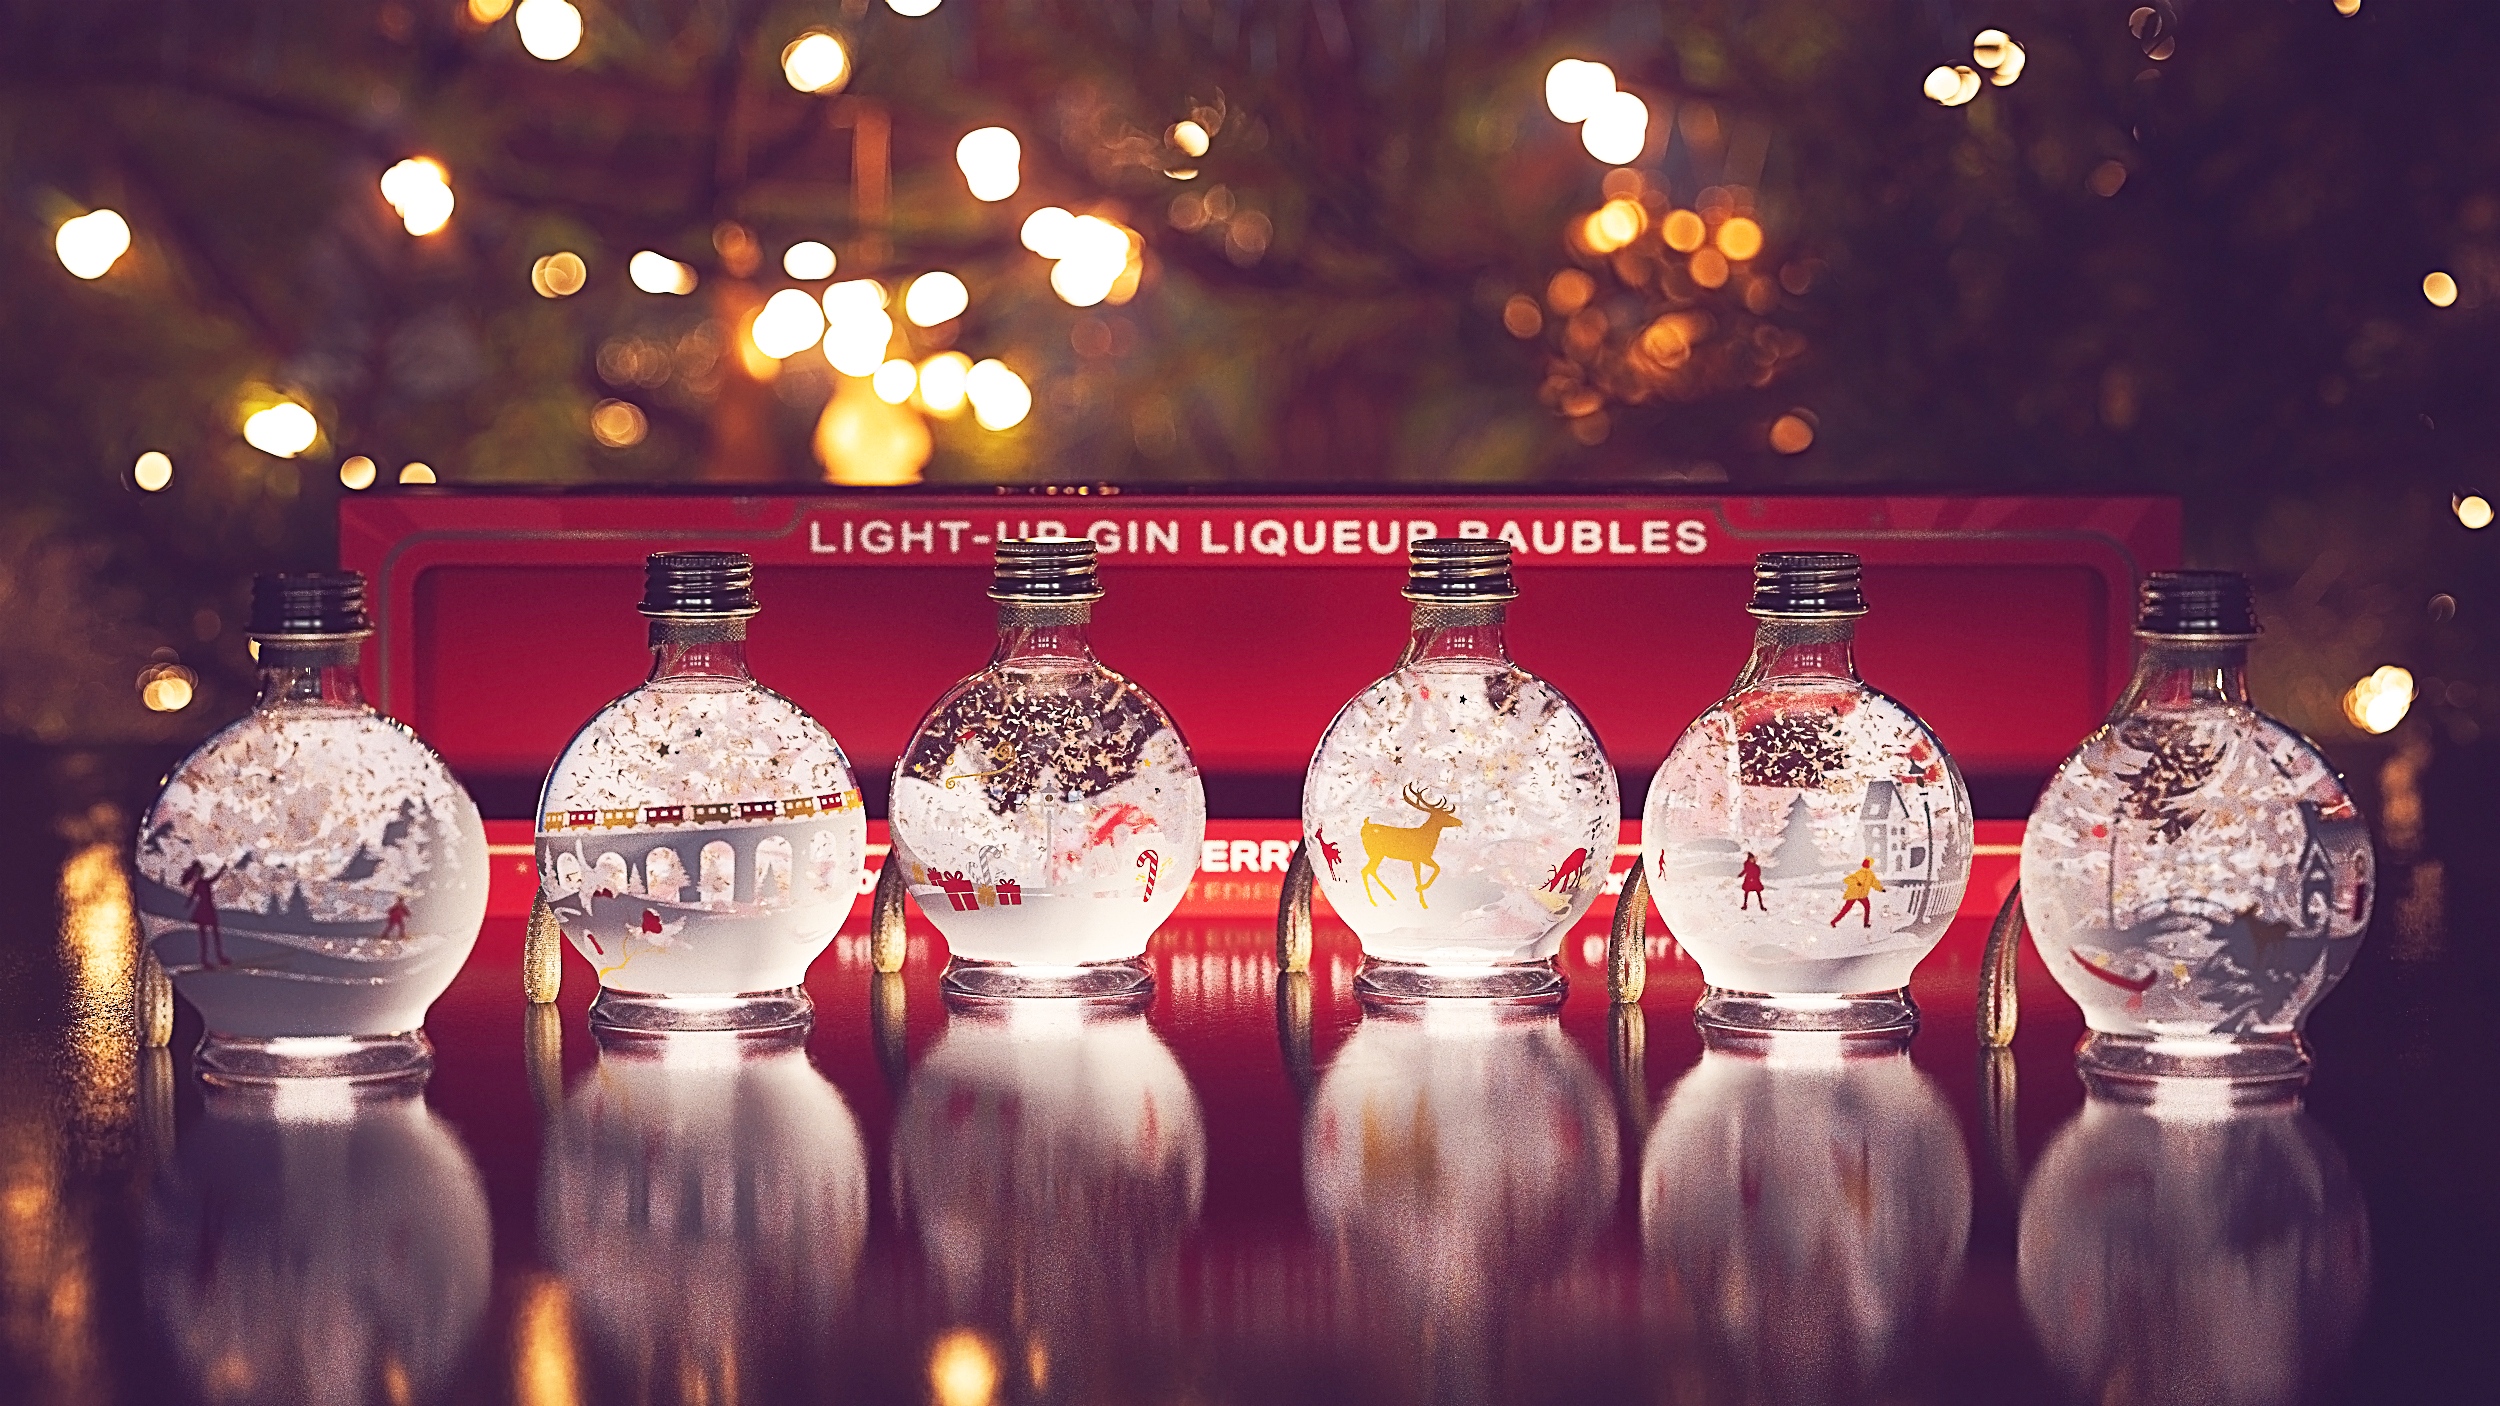 Baubles-Outside-Box